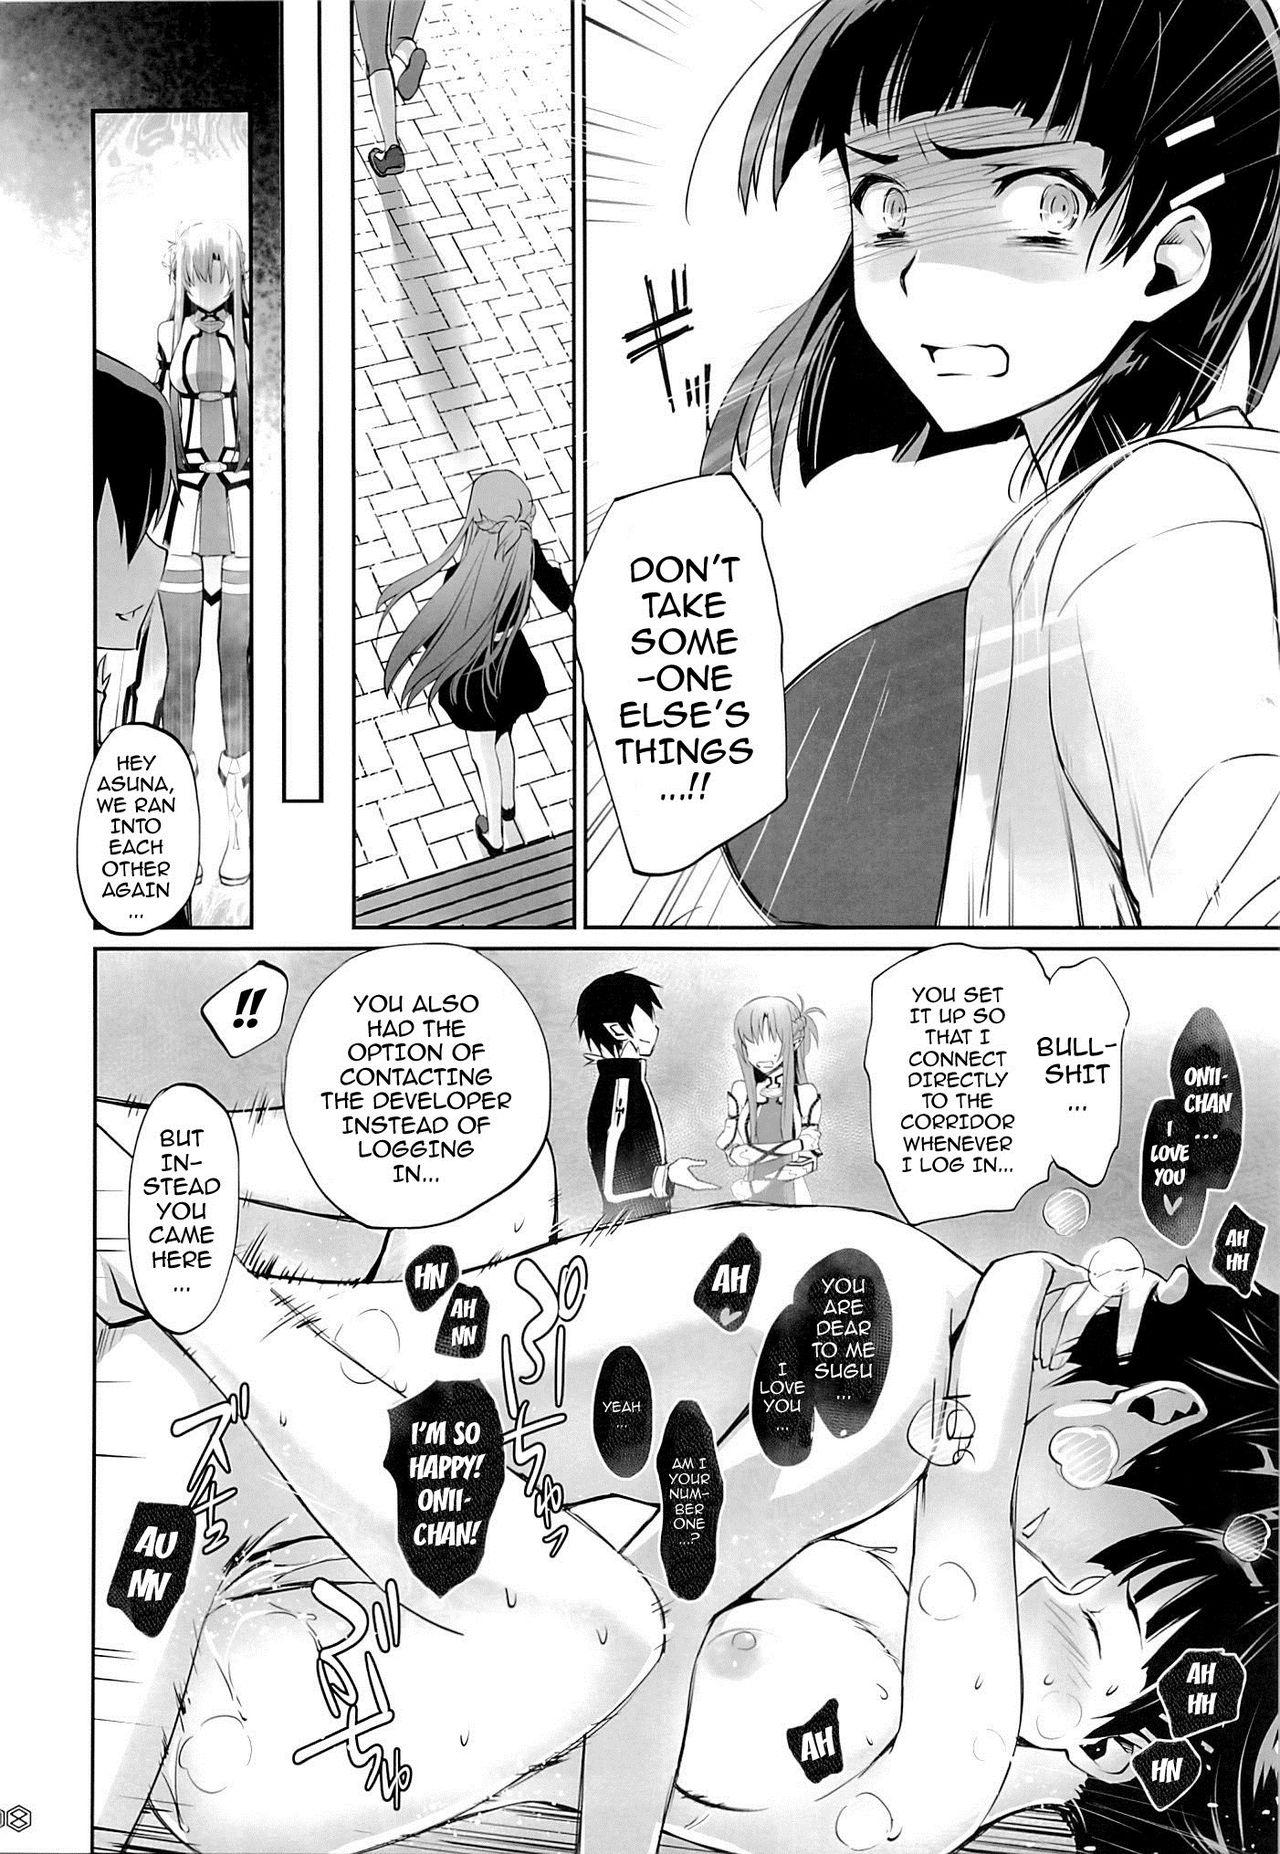 Furry turnover - Sword art online Room - Page 7